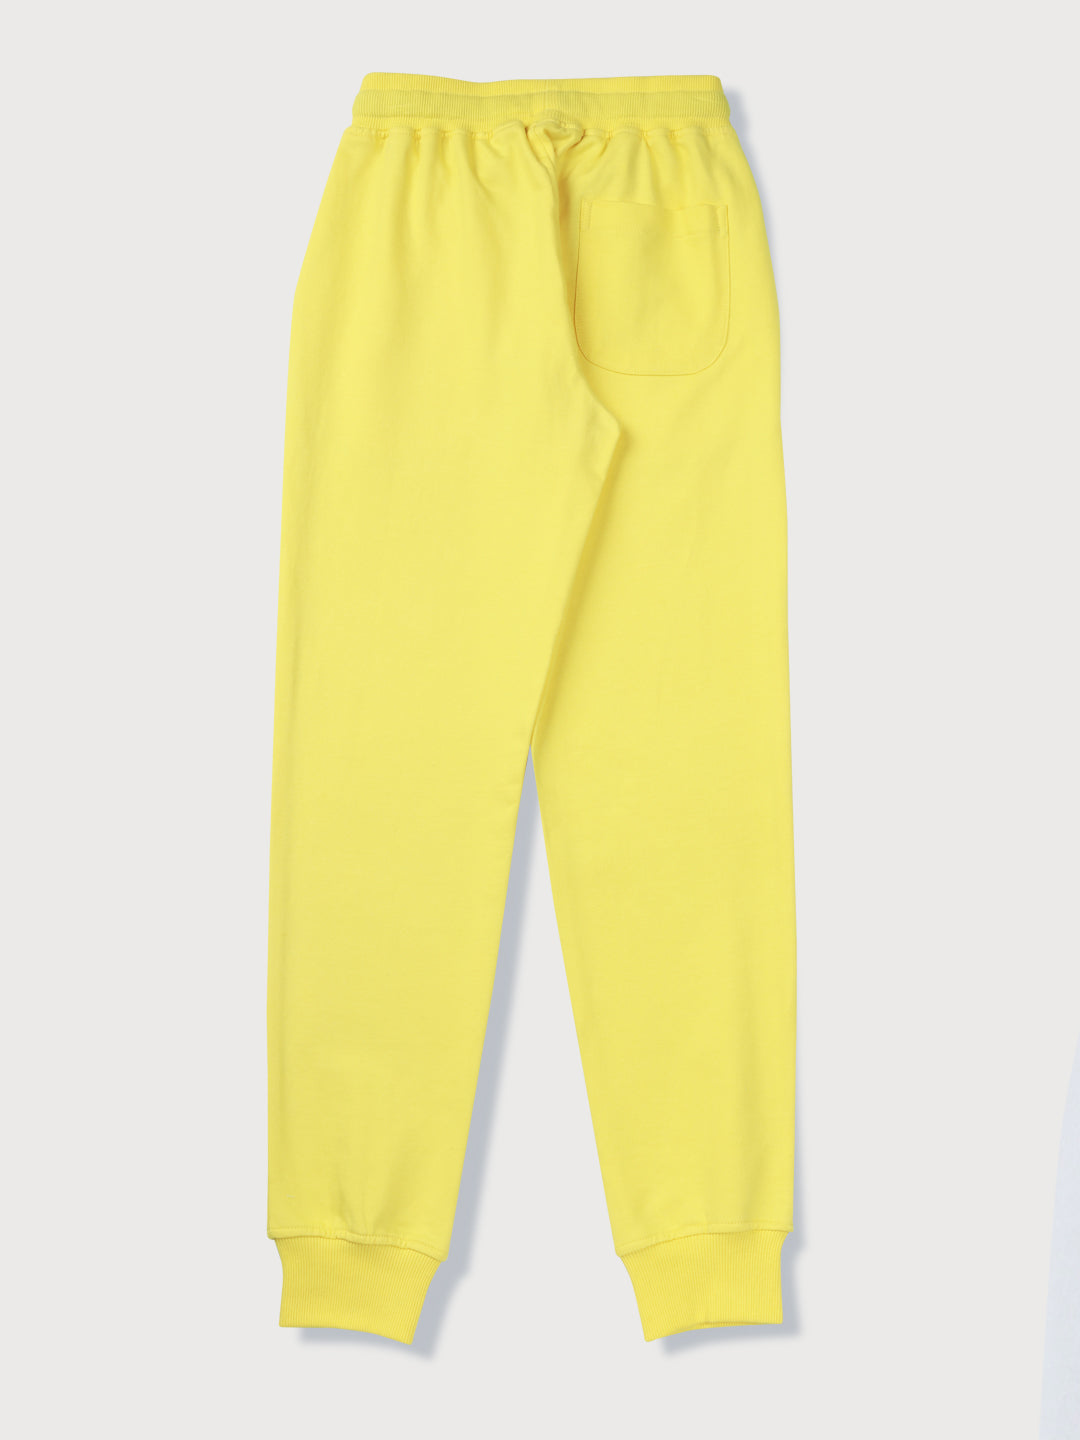 Girls Yellow Solid Knits Track Pant